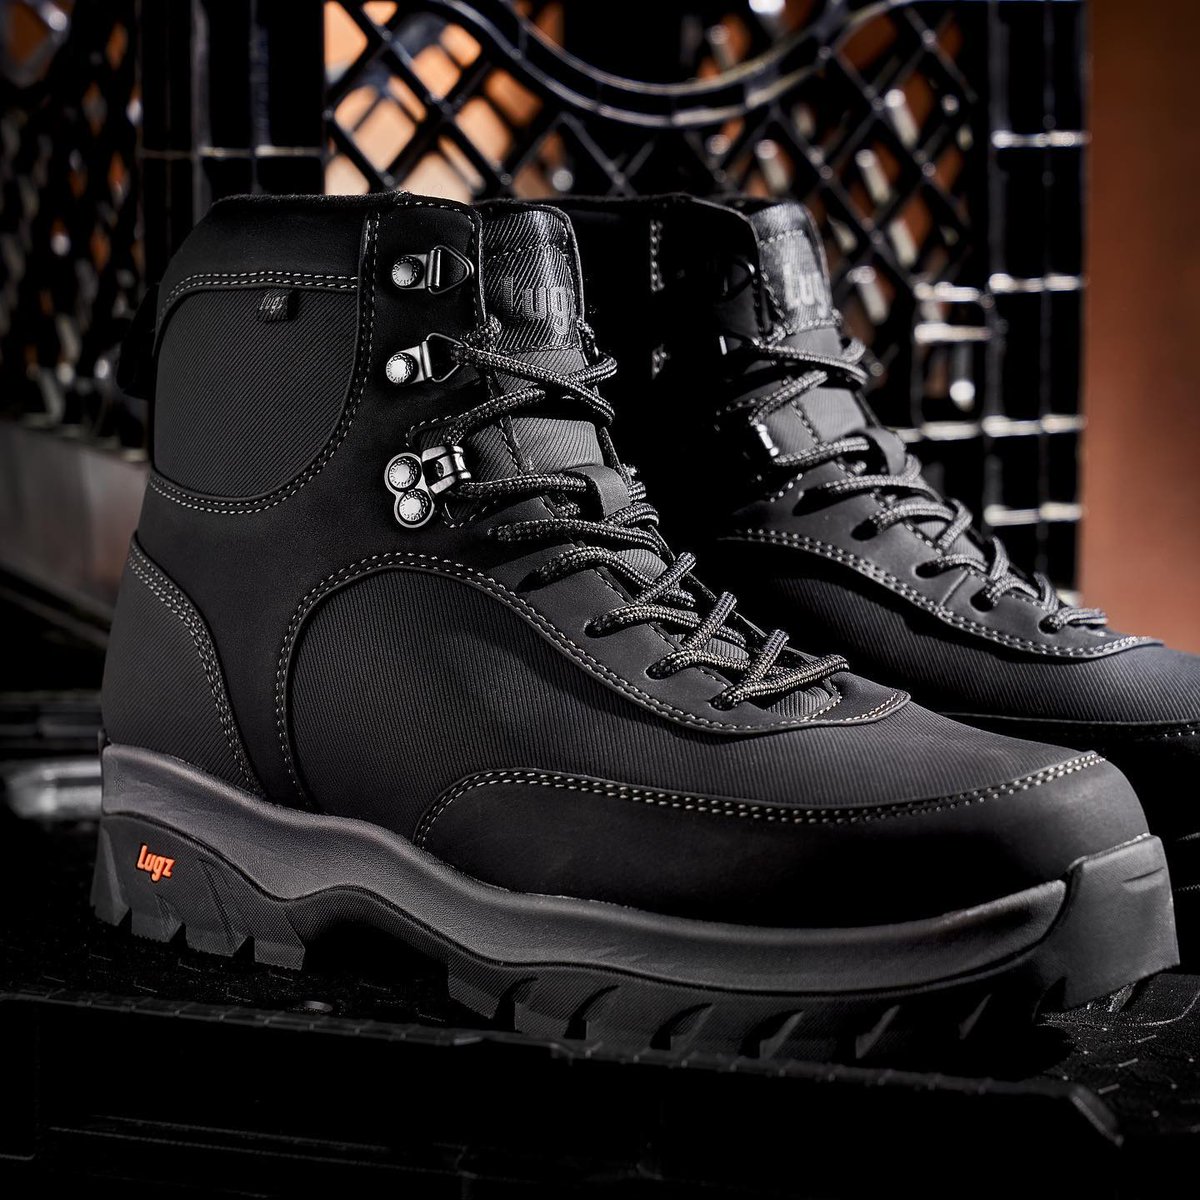 Enter to win the @LugzNYC Men’s Diablo Hi Boots for #FathersDay2023! #Giveaway open to US & ends 6/14. #gifted #Lugz #WalkWithUs #Menswear #Fashion 👉🏽 susiesreviews.com/2023/05/give-d…